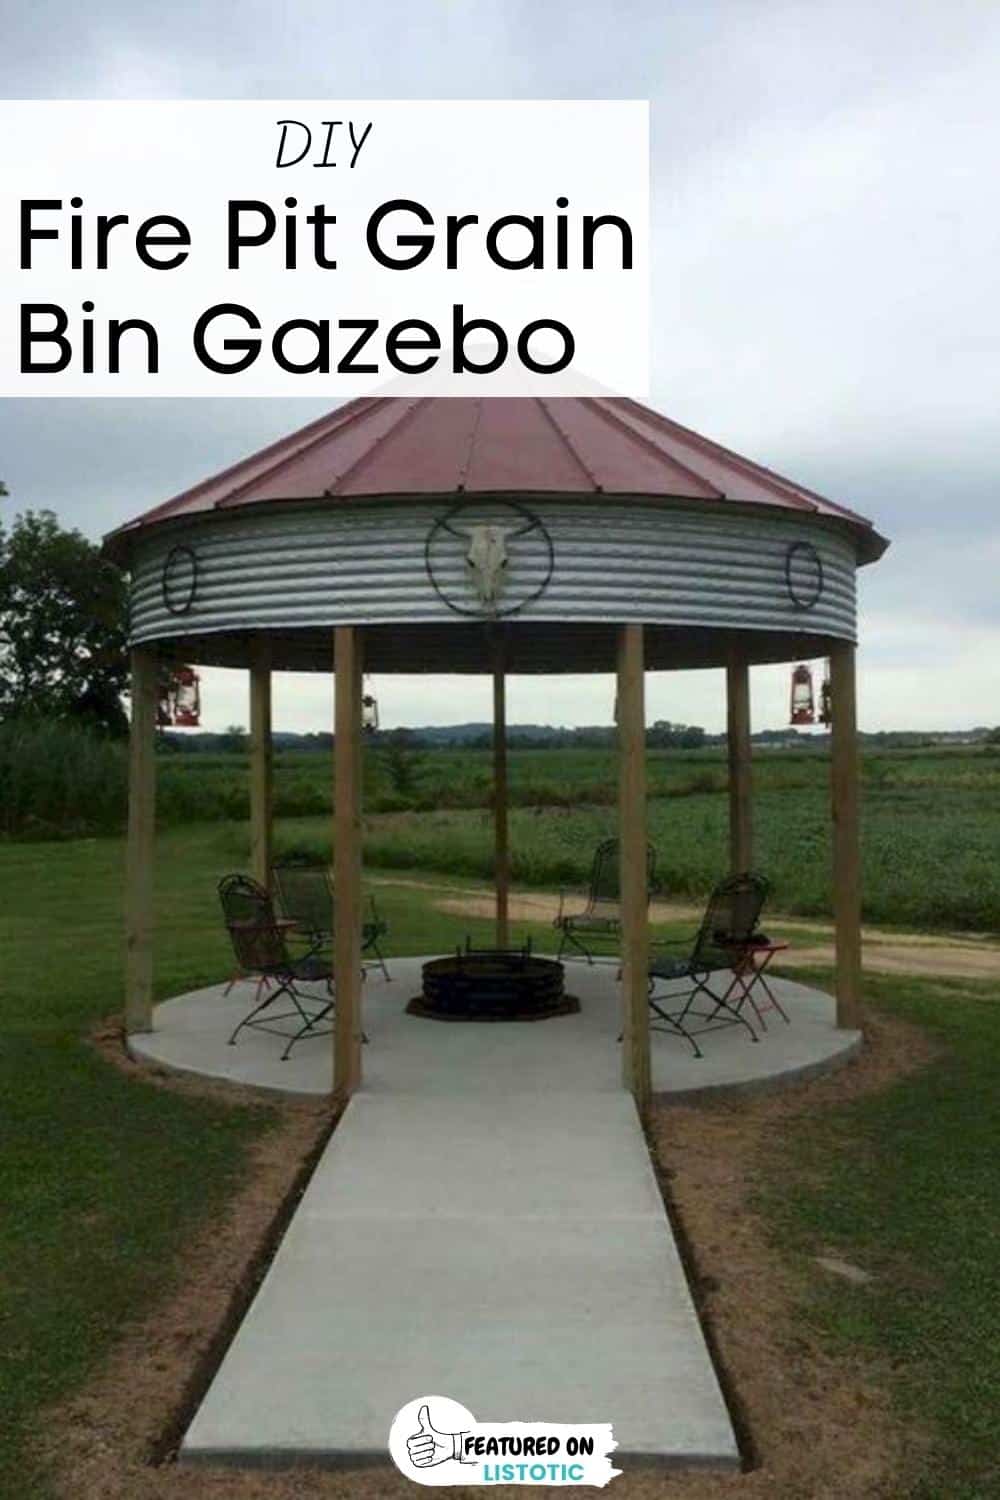 grain bin gazebo with roof and open sides with fire pit inside